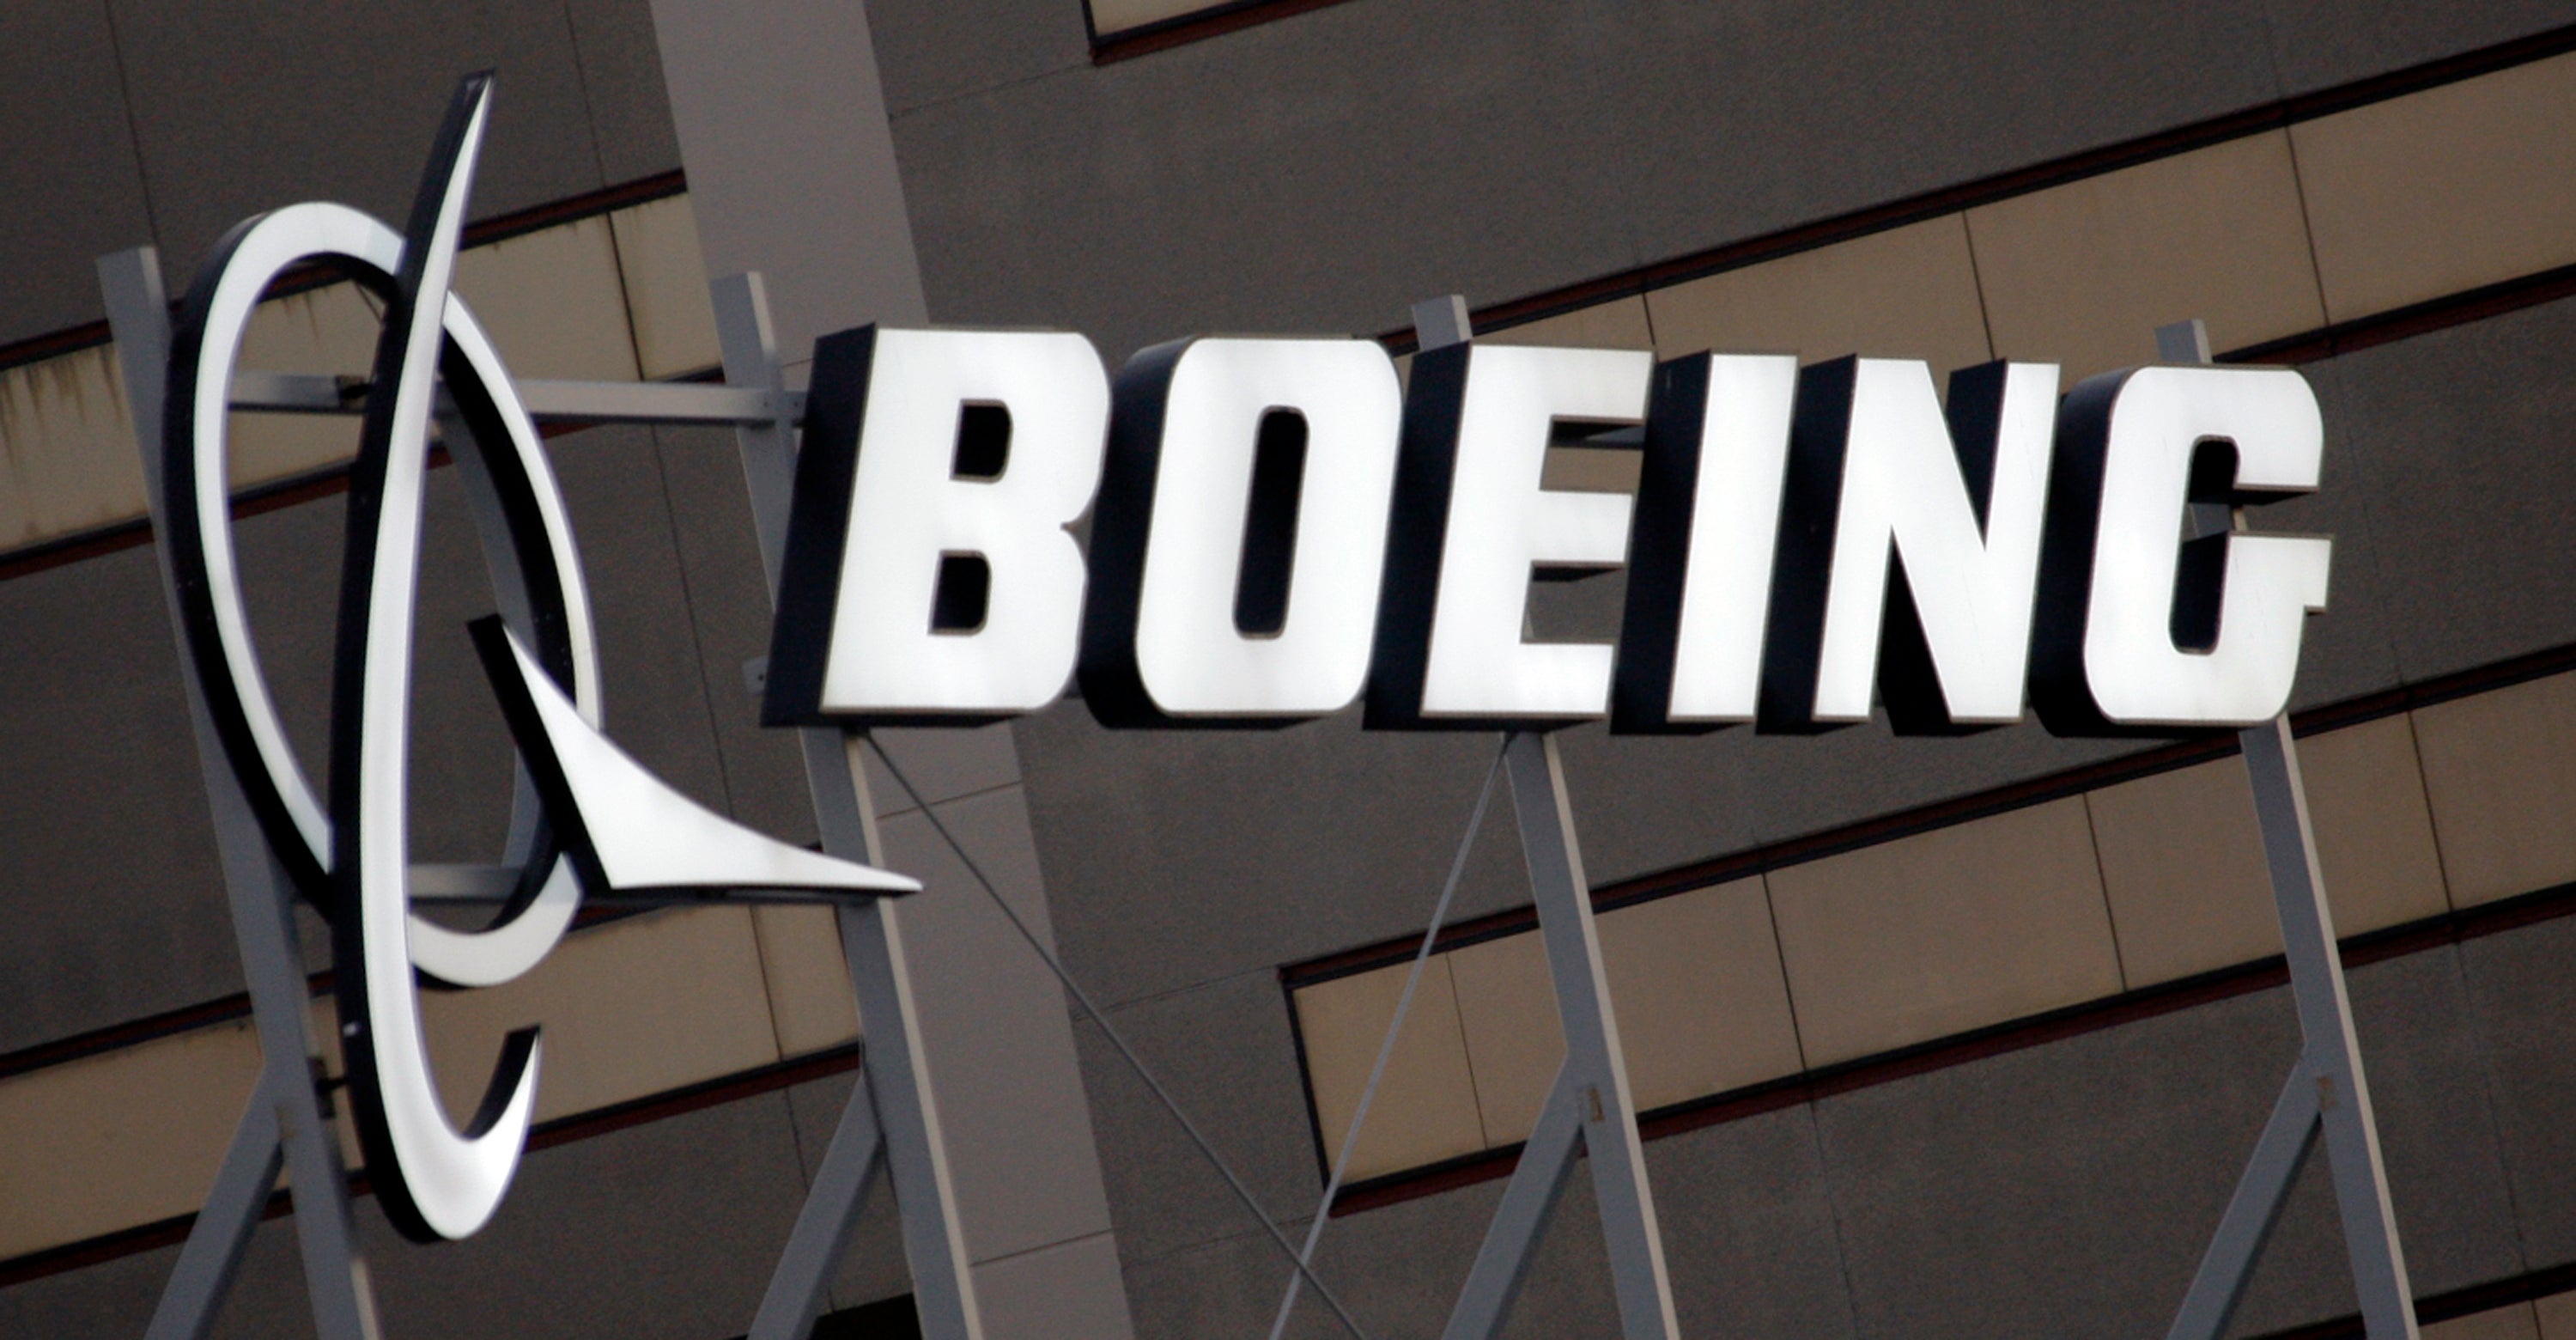 Boeing has agreed to buy its longtime supplier Spirit AeroSystems for $4.7bn